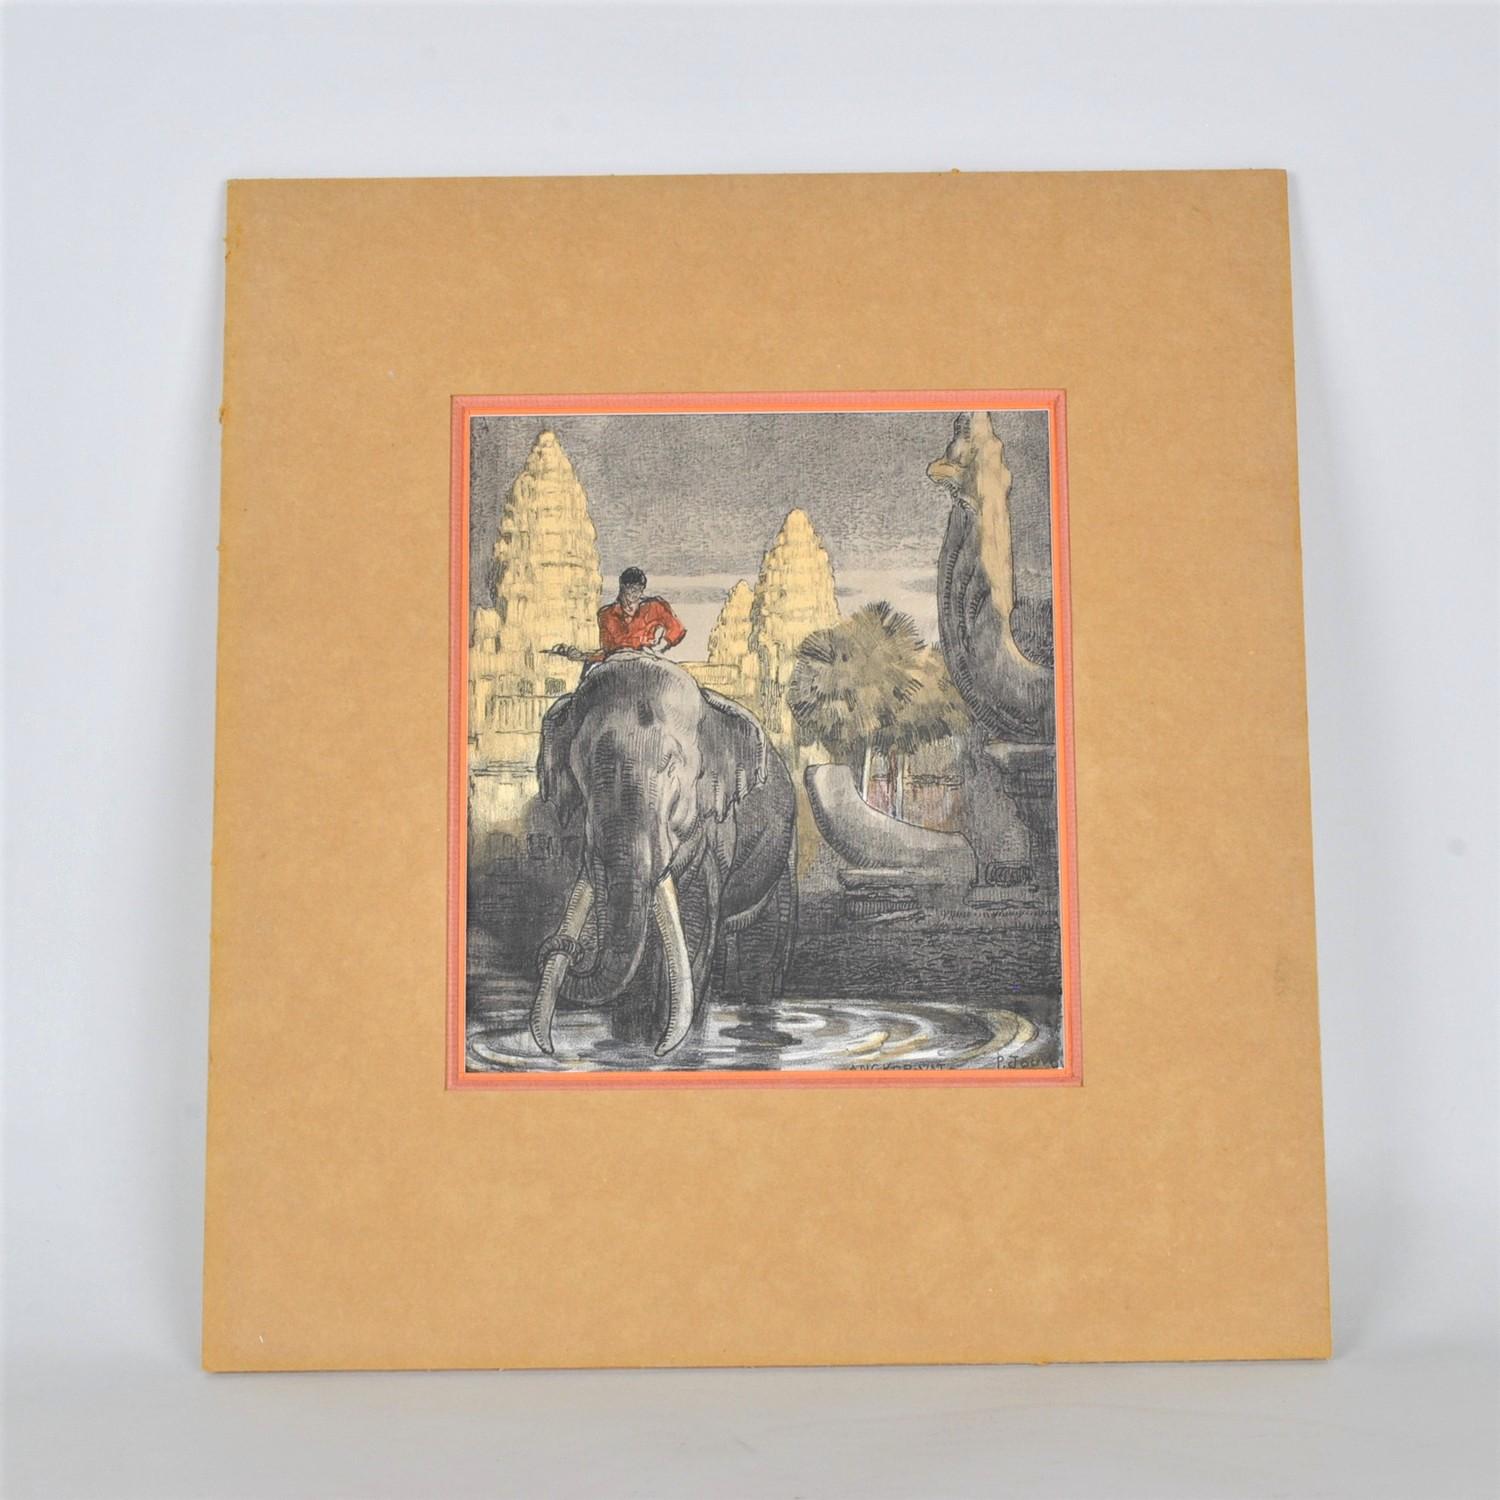 Color lithograph, framed, representing an elephant in front of the temples of Angkor Wat, titled and signed lower right.

Dimensions at image 18x20cm
Dimensions at sight 22.5 x 28cm.